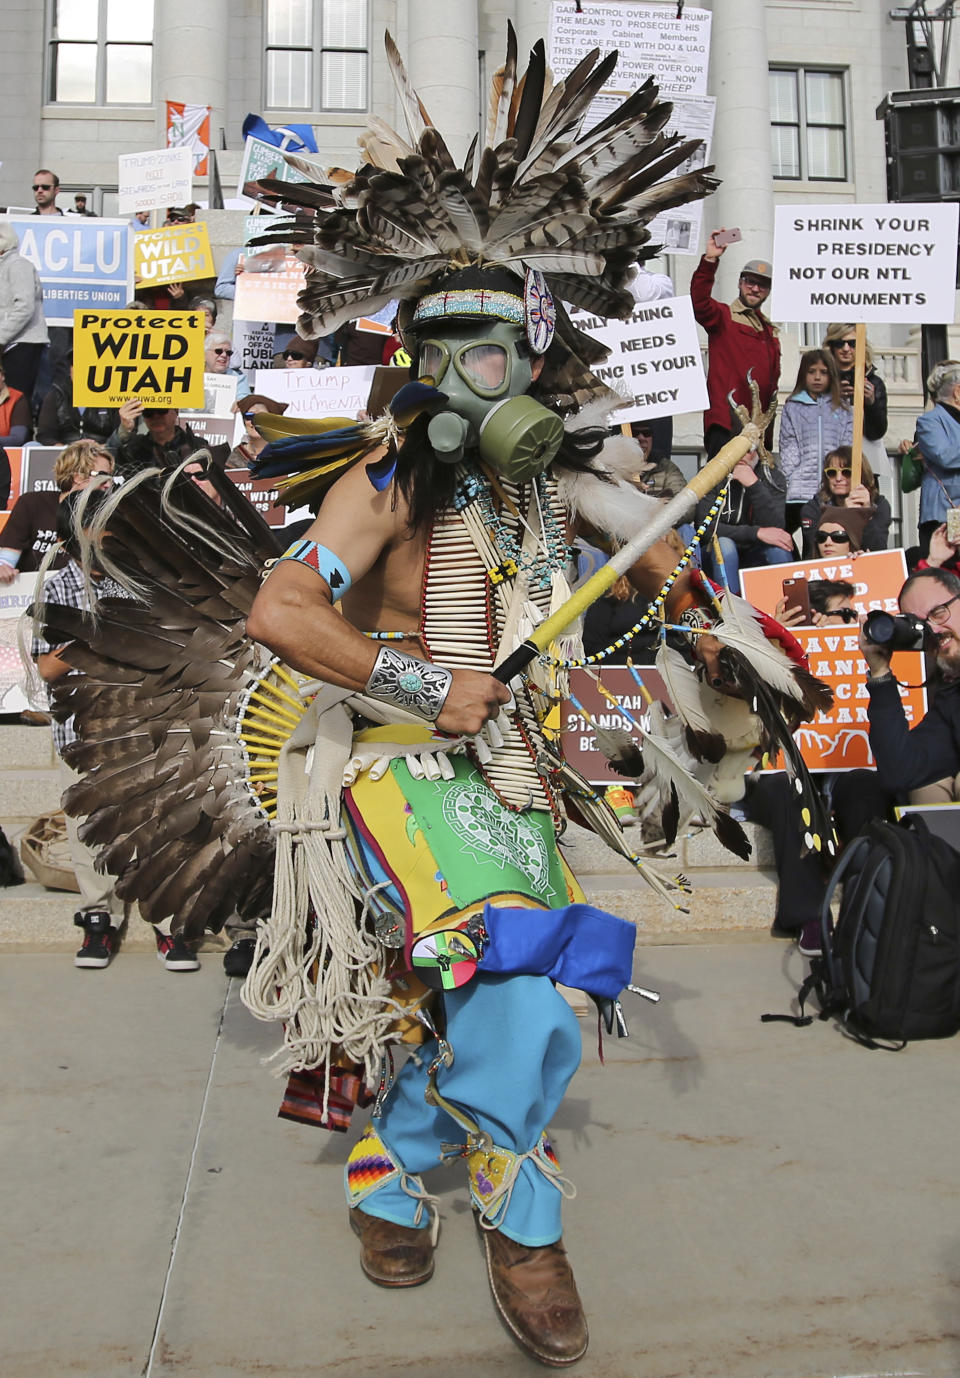 FILE - In this Dec. 2, 2017, photo, a supporter of the Bears Ears and Grand Staircase-Escalante National Monuments wears a colorful headdress during a rally against President Trump's reduction of the two National Monuments in Salt Lake City. The U.S. government is unveiling its final management plan for the national monument on tribal lands home to ancient cliff dwellings and other artifacts in Utah that was significantly downsized by President Donald Trump. Conservation groups, tribes and an outdoor retail company have sued challenging the downsizing. (AP Photo/Rick Bowmer, File)